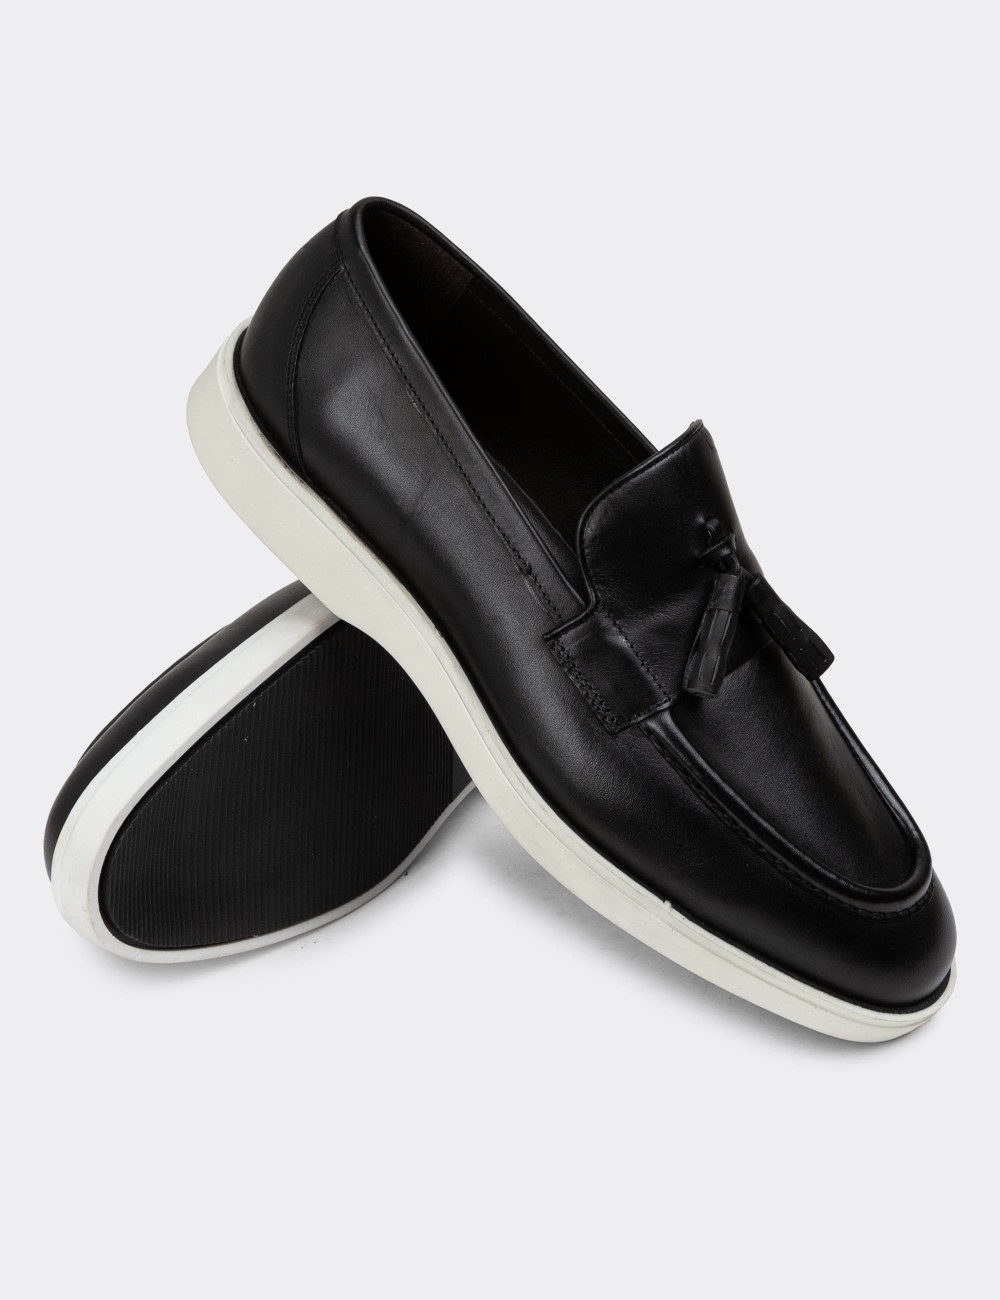 Black Leather Loafers - 01958MSYHC01